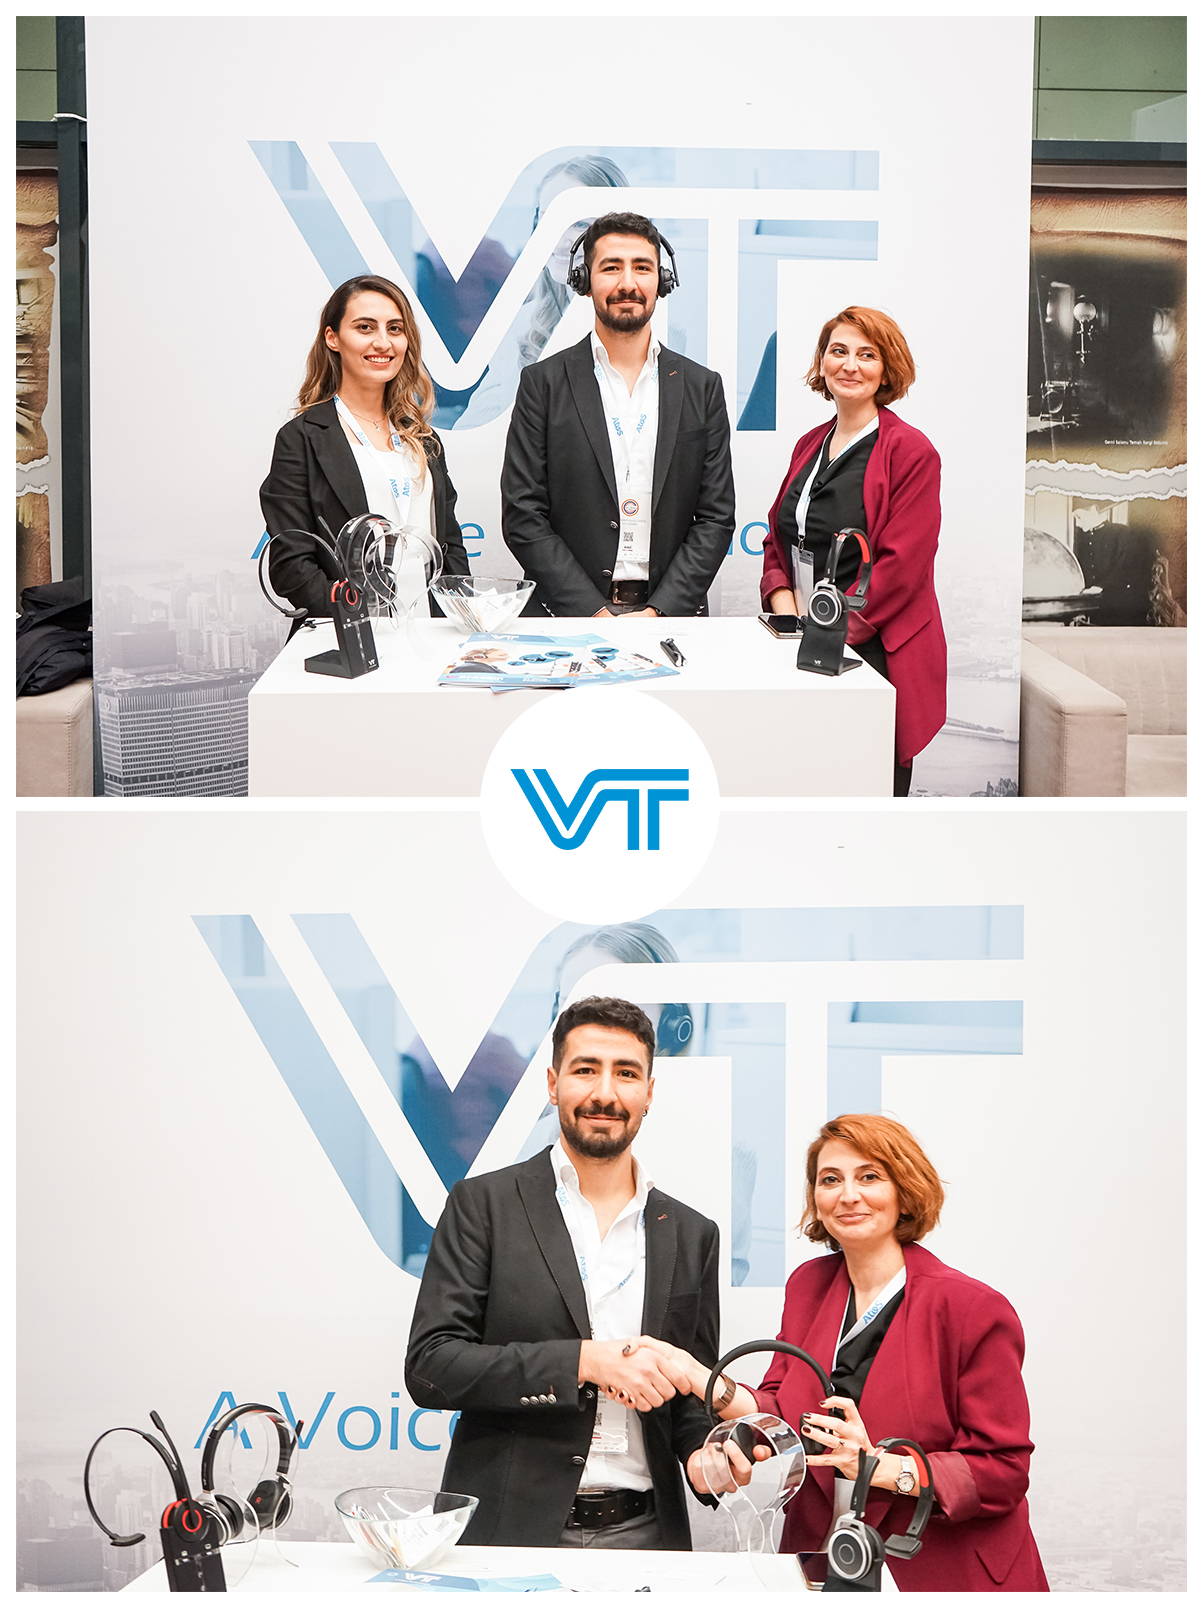 VT Turkey Distributor participate in IMI event with VT Communication Solutions